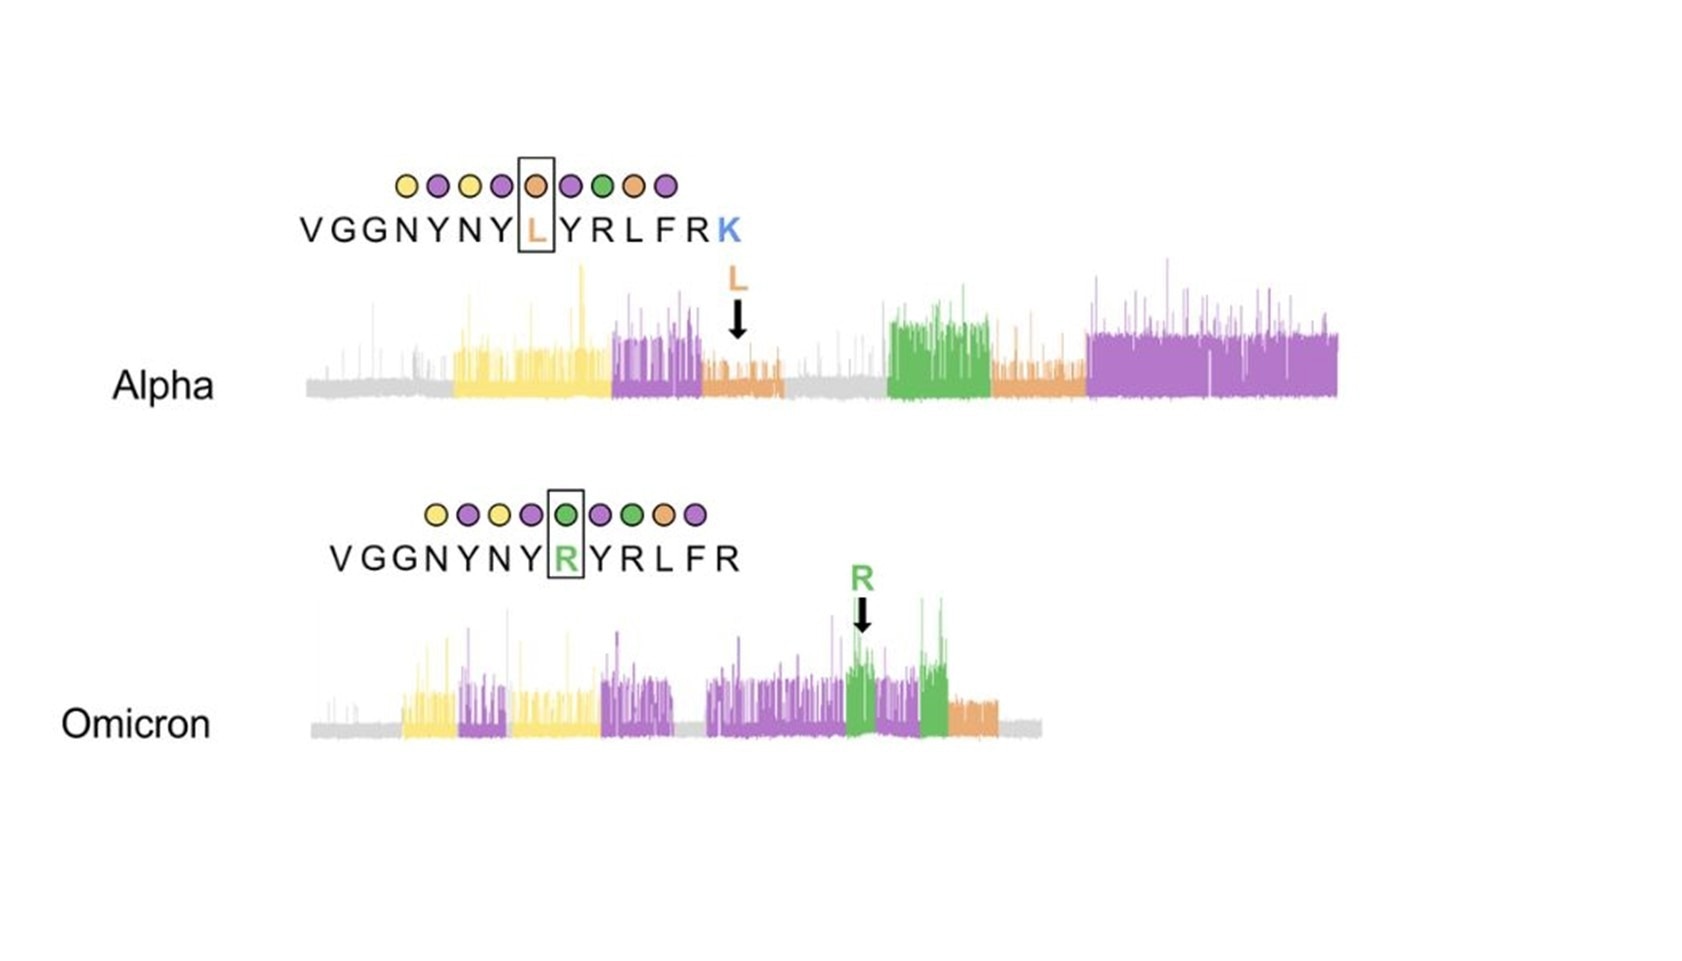 Figure 3. Example protein sequencing traces of SARS-CoV-2 variants for the peptide where the L452R mutation occurs shows that recognizer binding produces clear kinetic differences influenced by the L452R mutation that can be detected with Quantum-Si’s Platinum instrument, effectively differentiating the Alpha variant from Omicron.